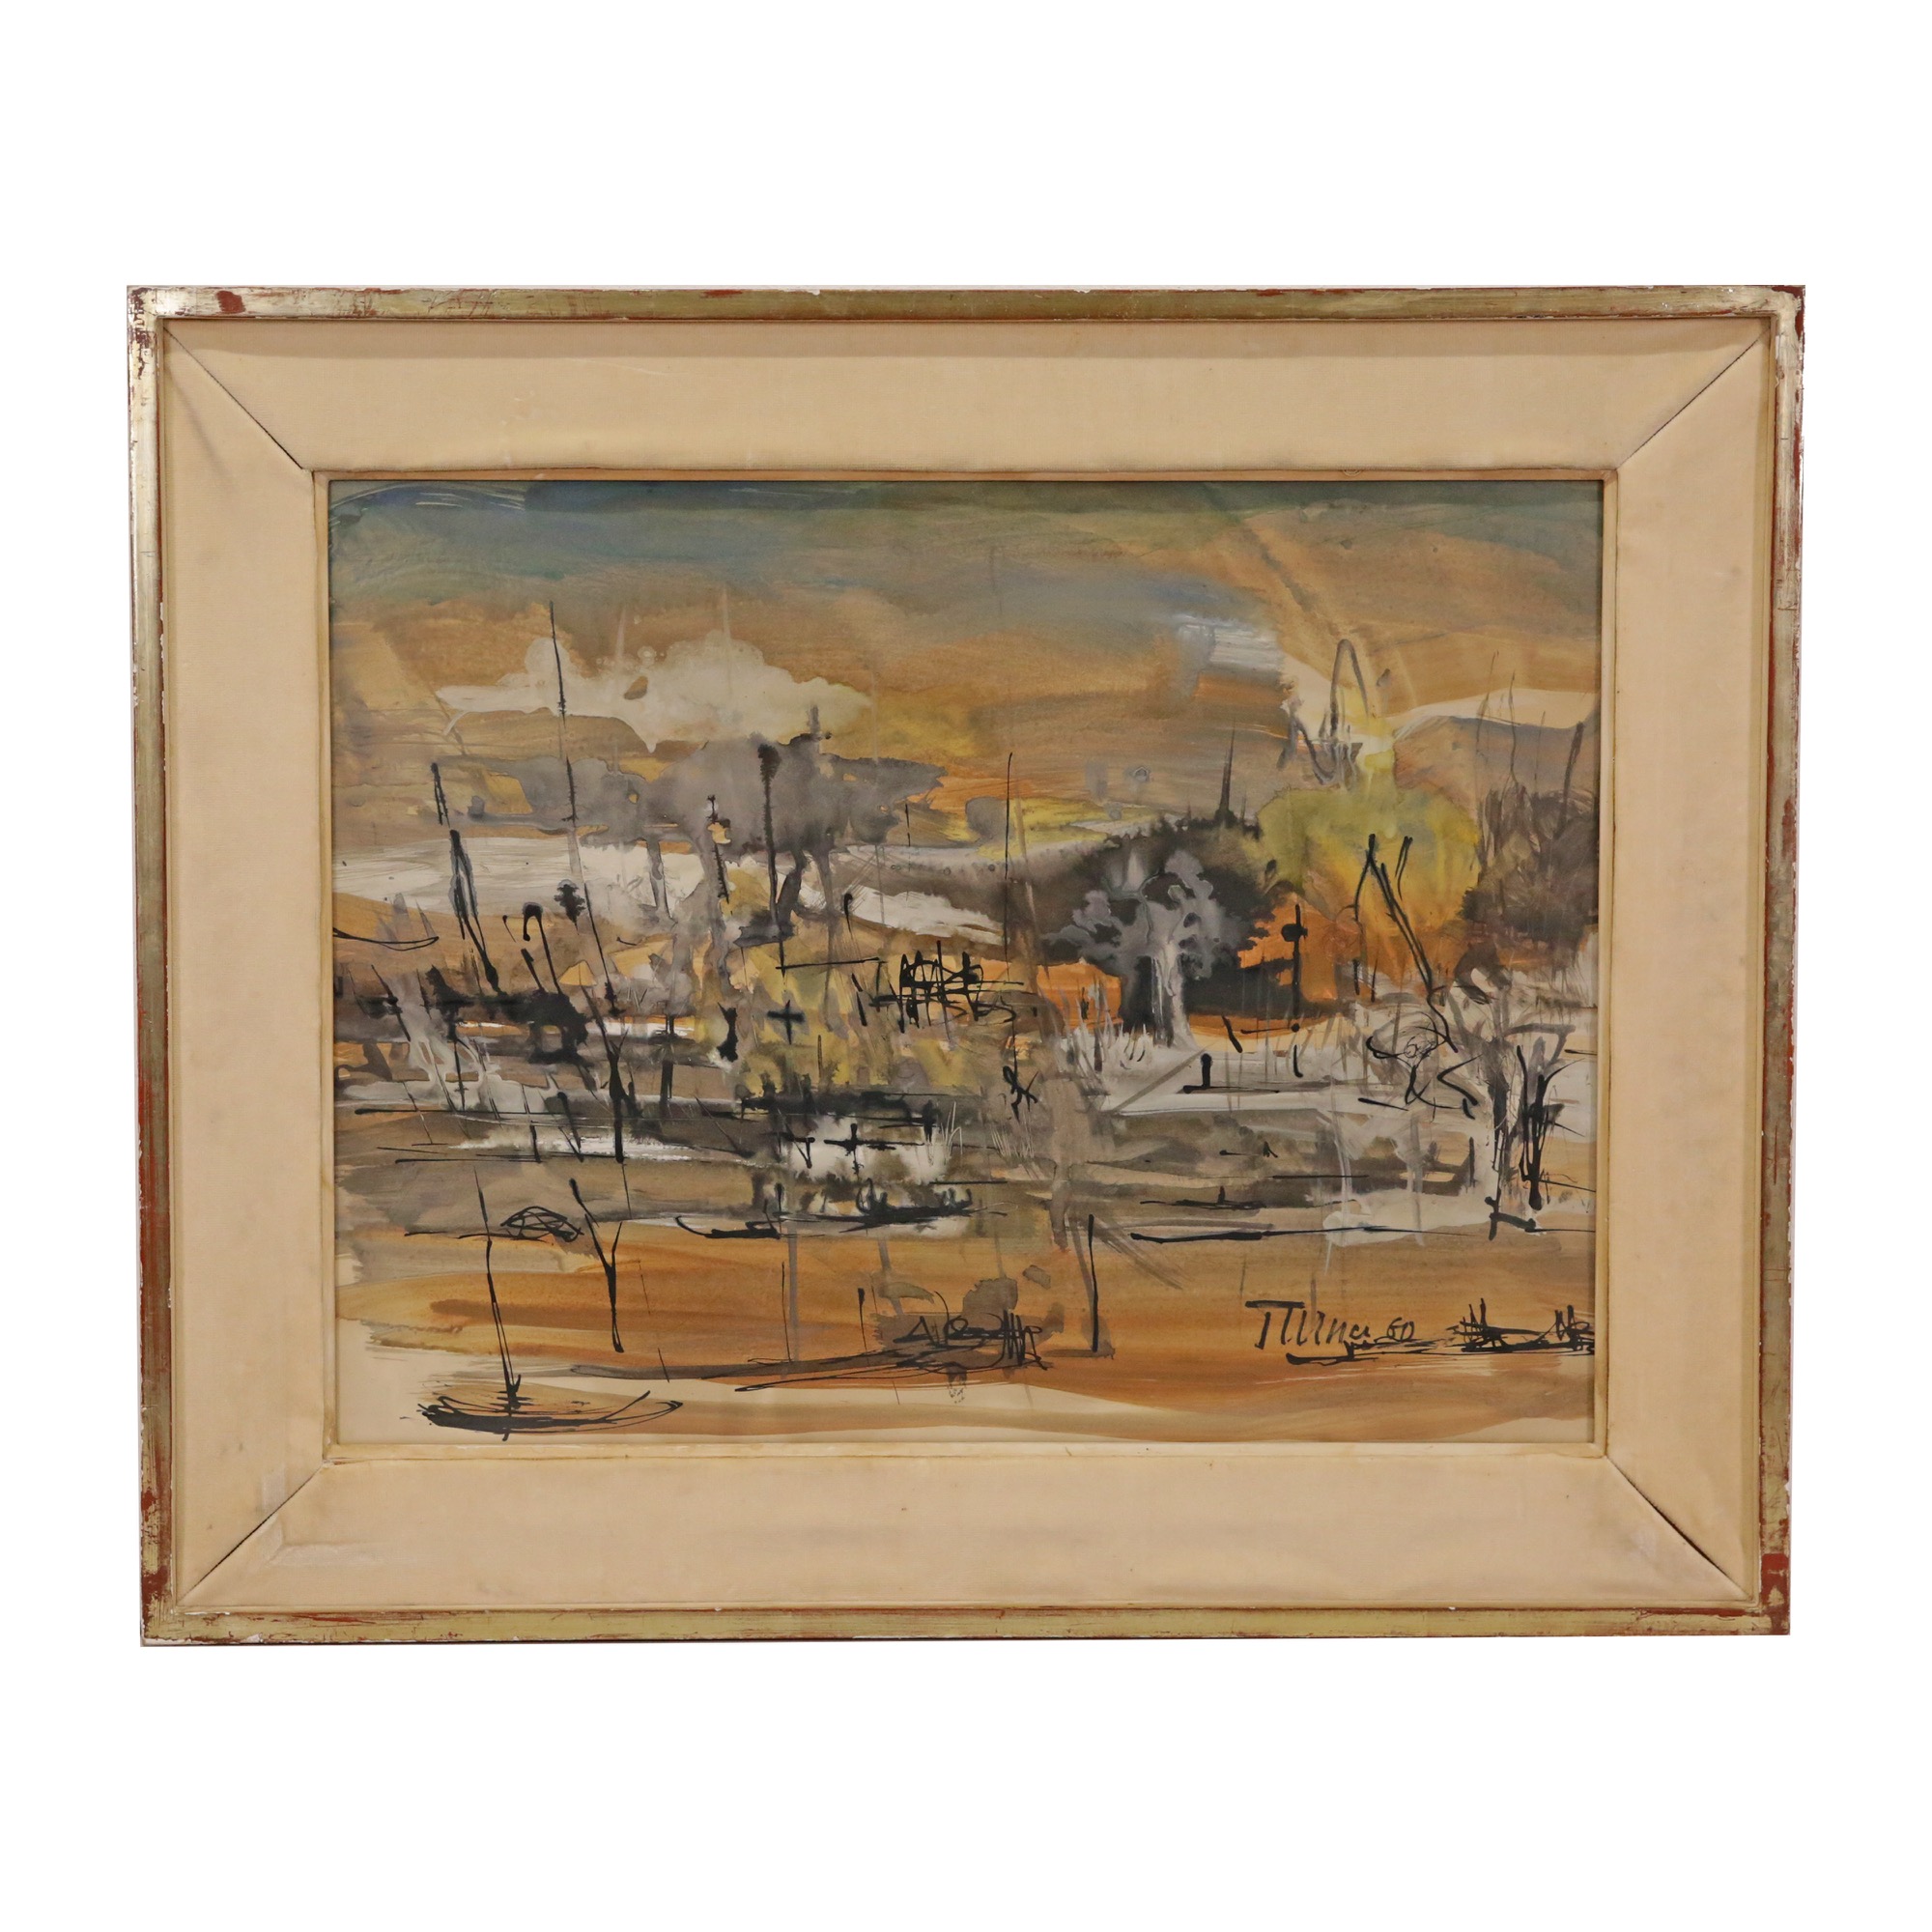 Paysage abstrait, aquarelle, signed by the artist TURNER, French painting of the 20th century.